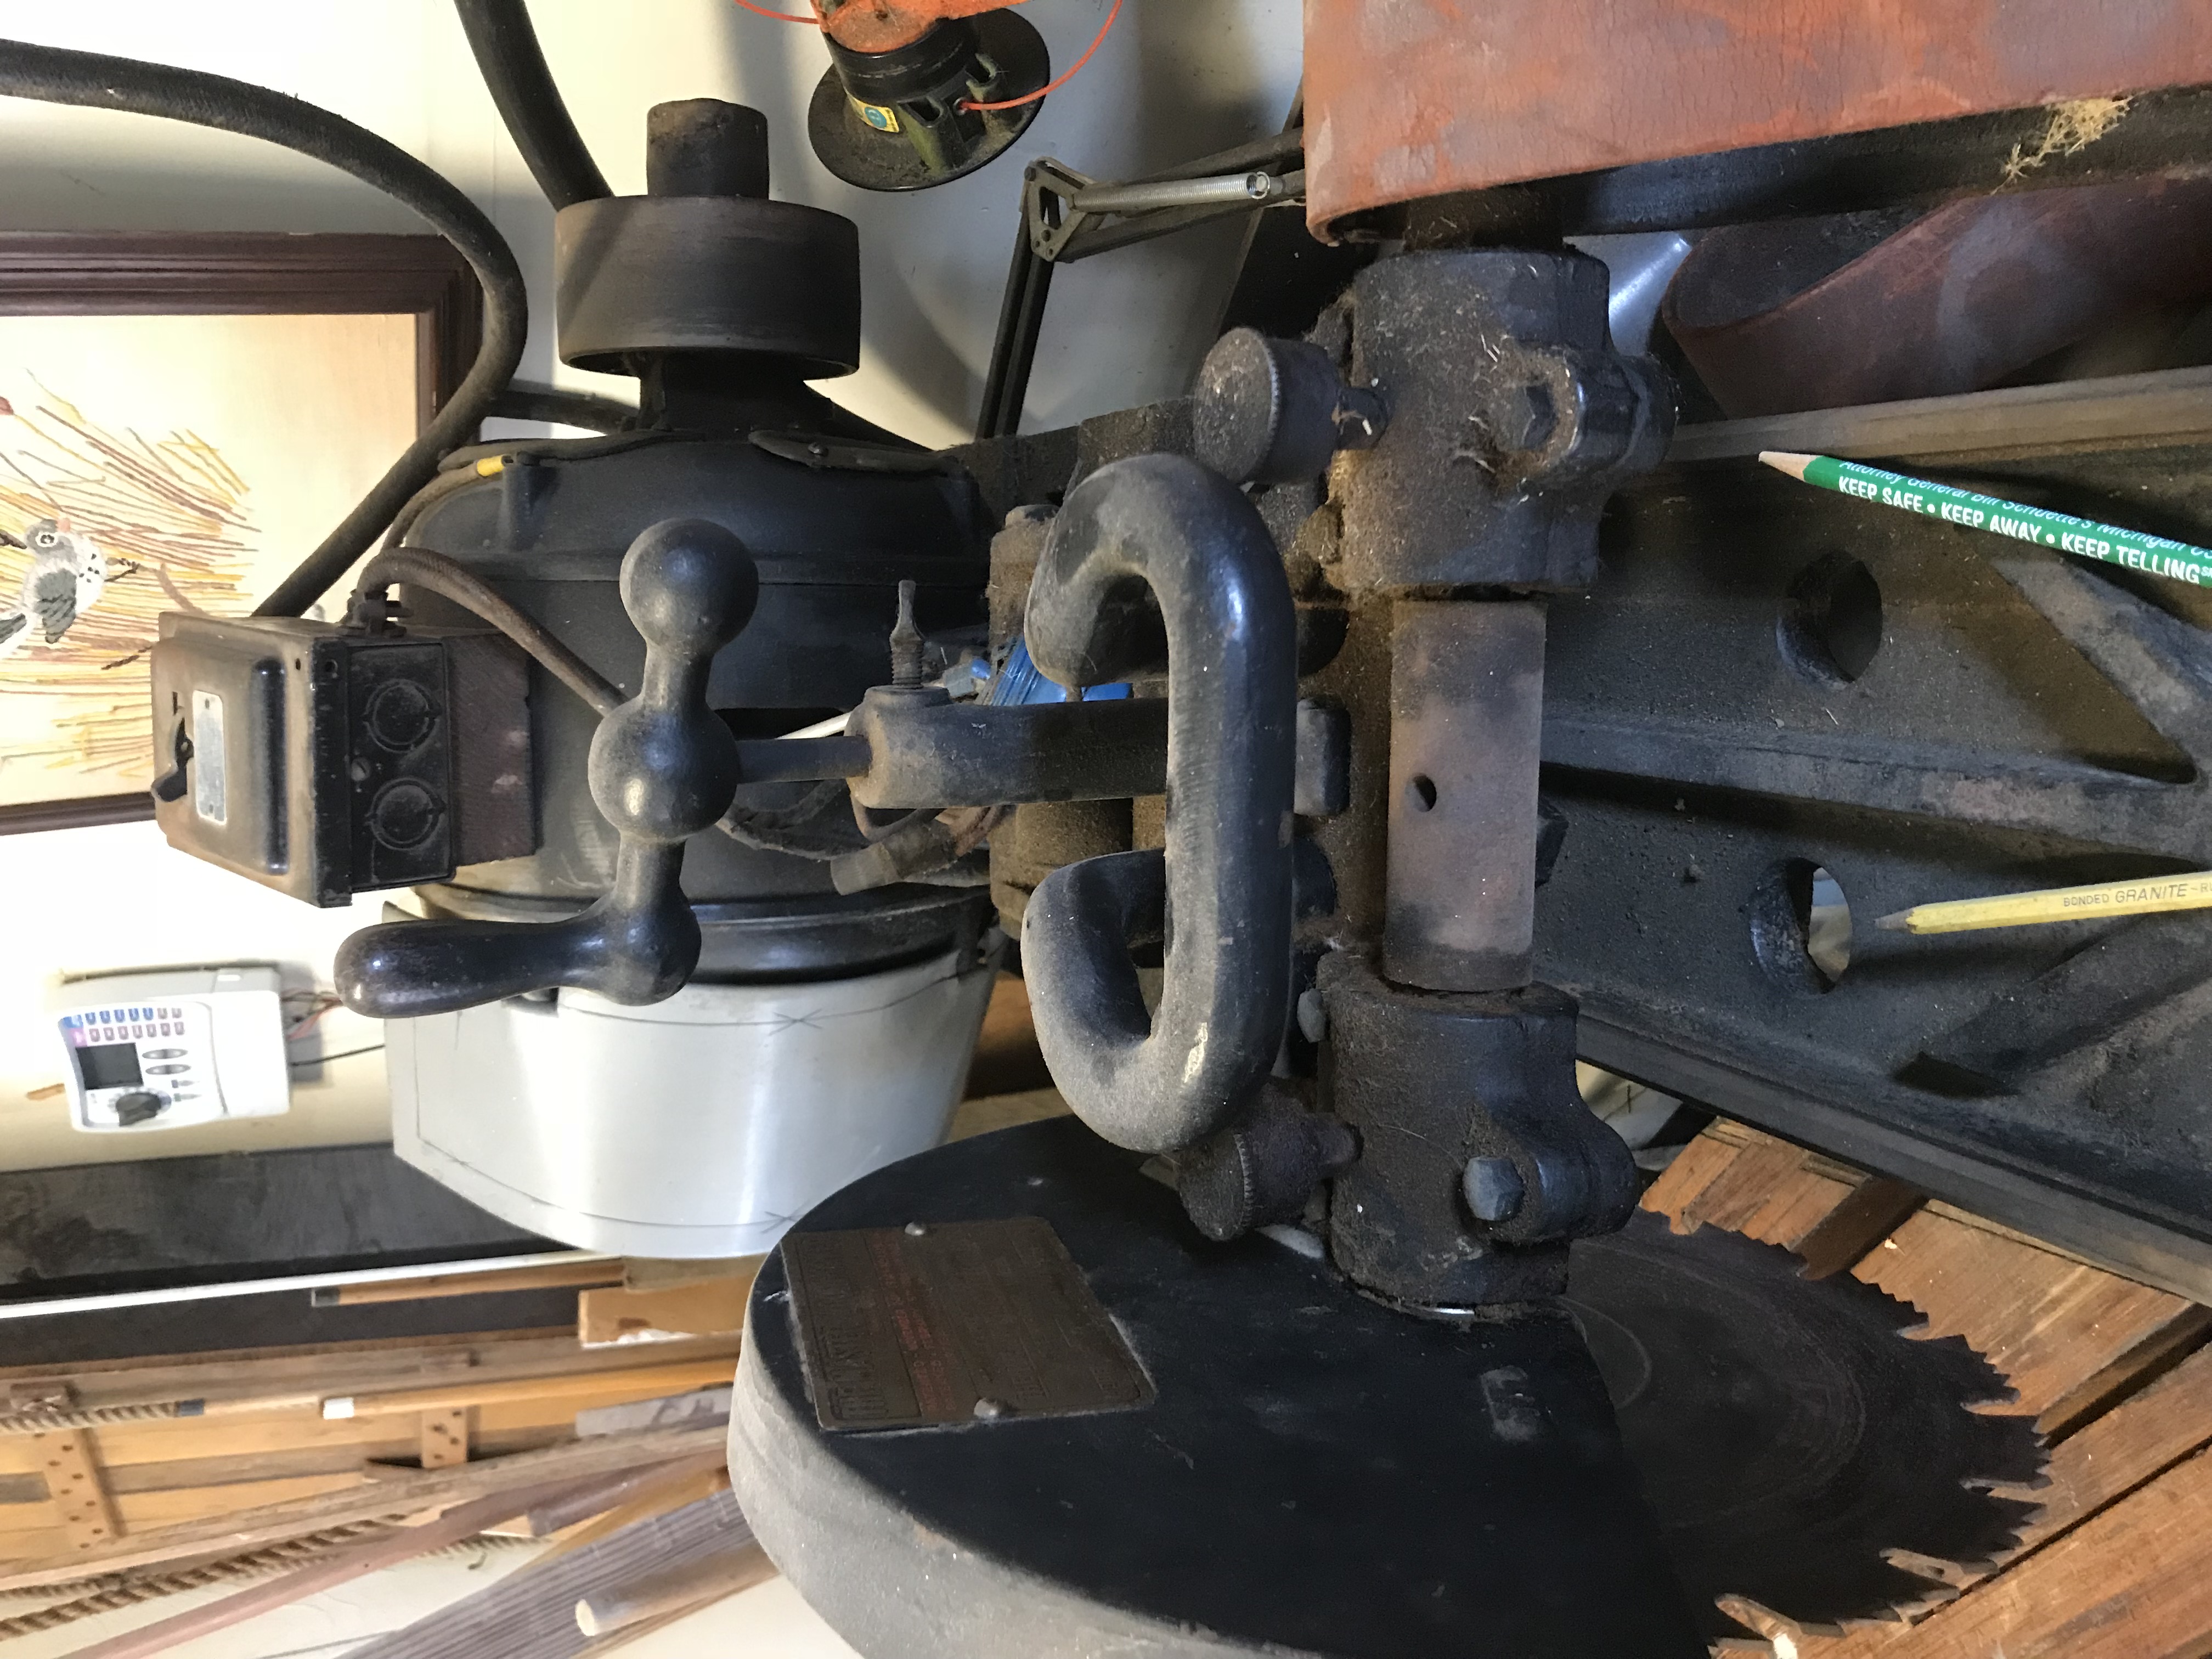 https://antiquemachinery.com/images-Master-Woodworker/IMG_3570.jpg